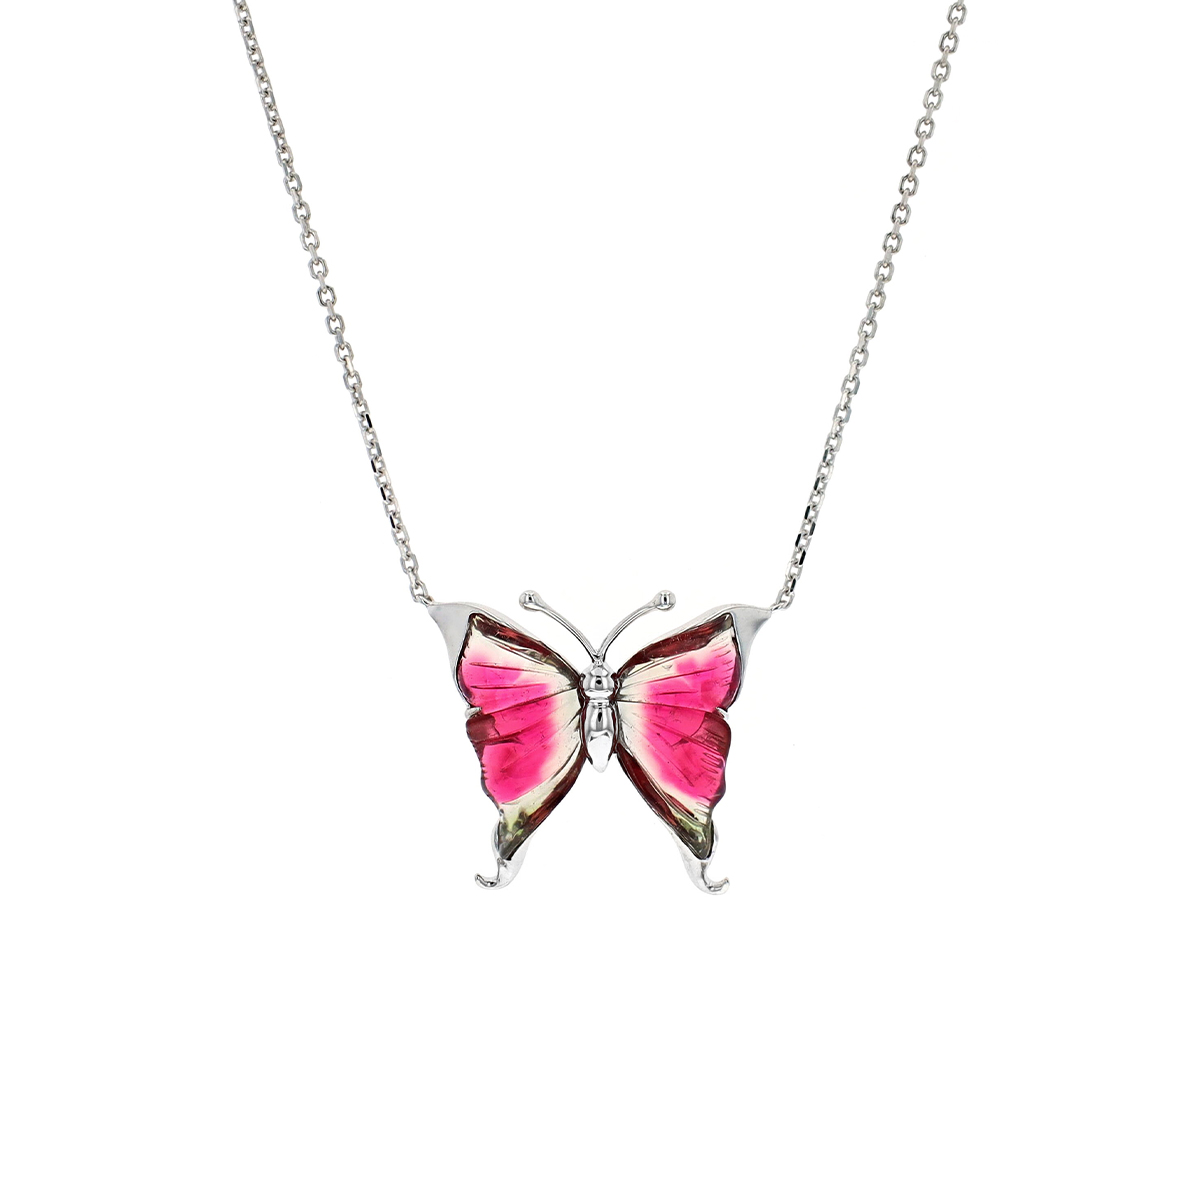 14K White Gold Pink Tourmaline Butterfly Necklace